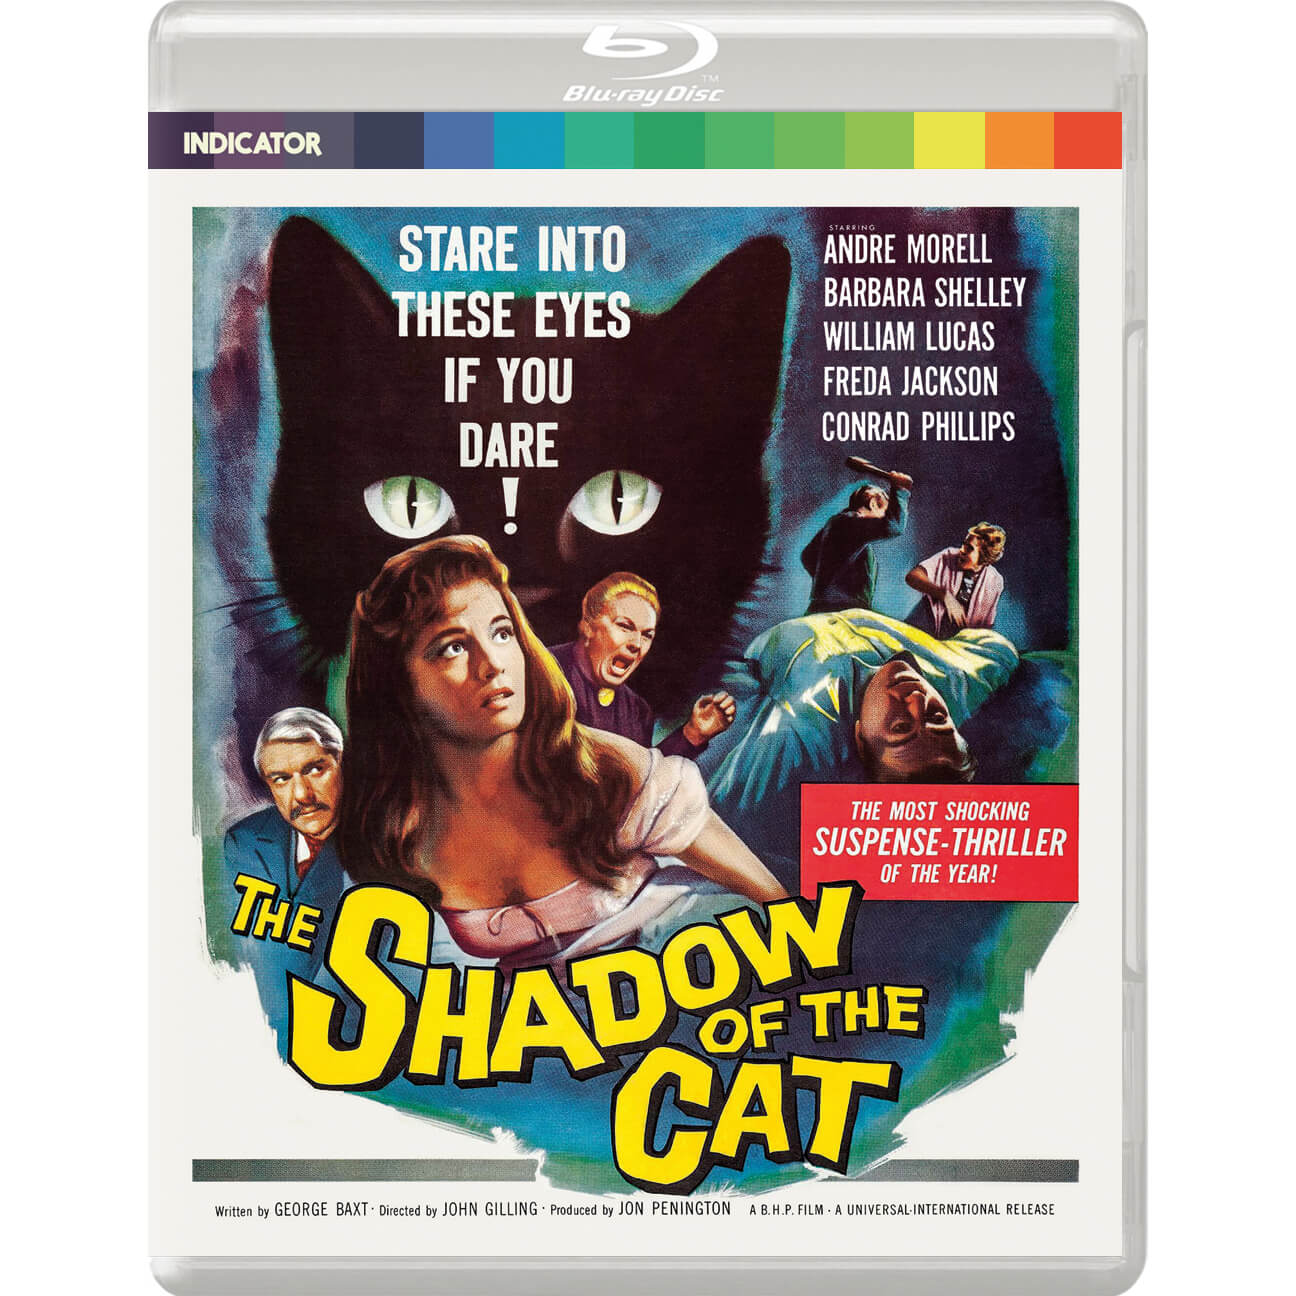 The Shadow of the Cat (Standard Edition)